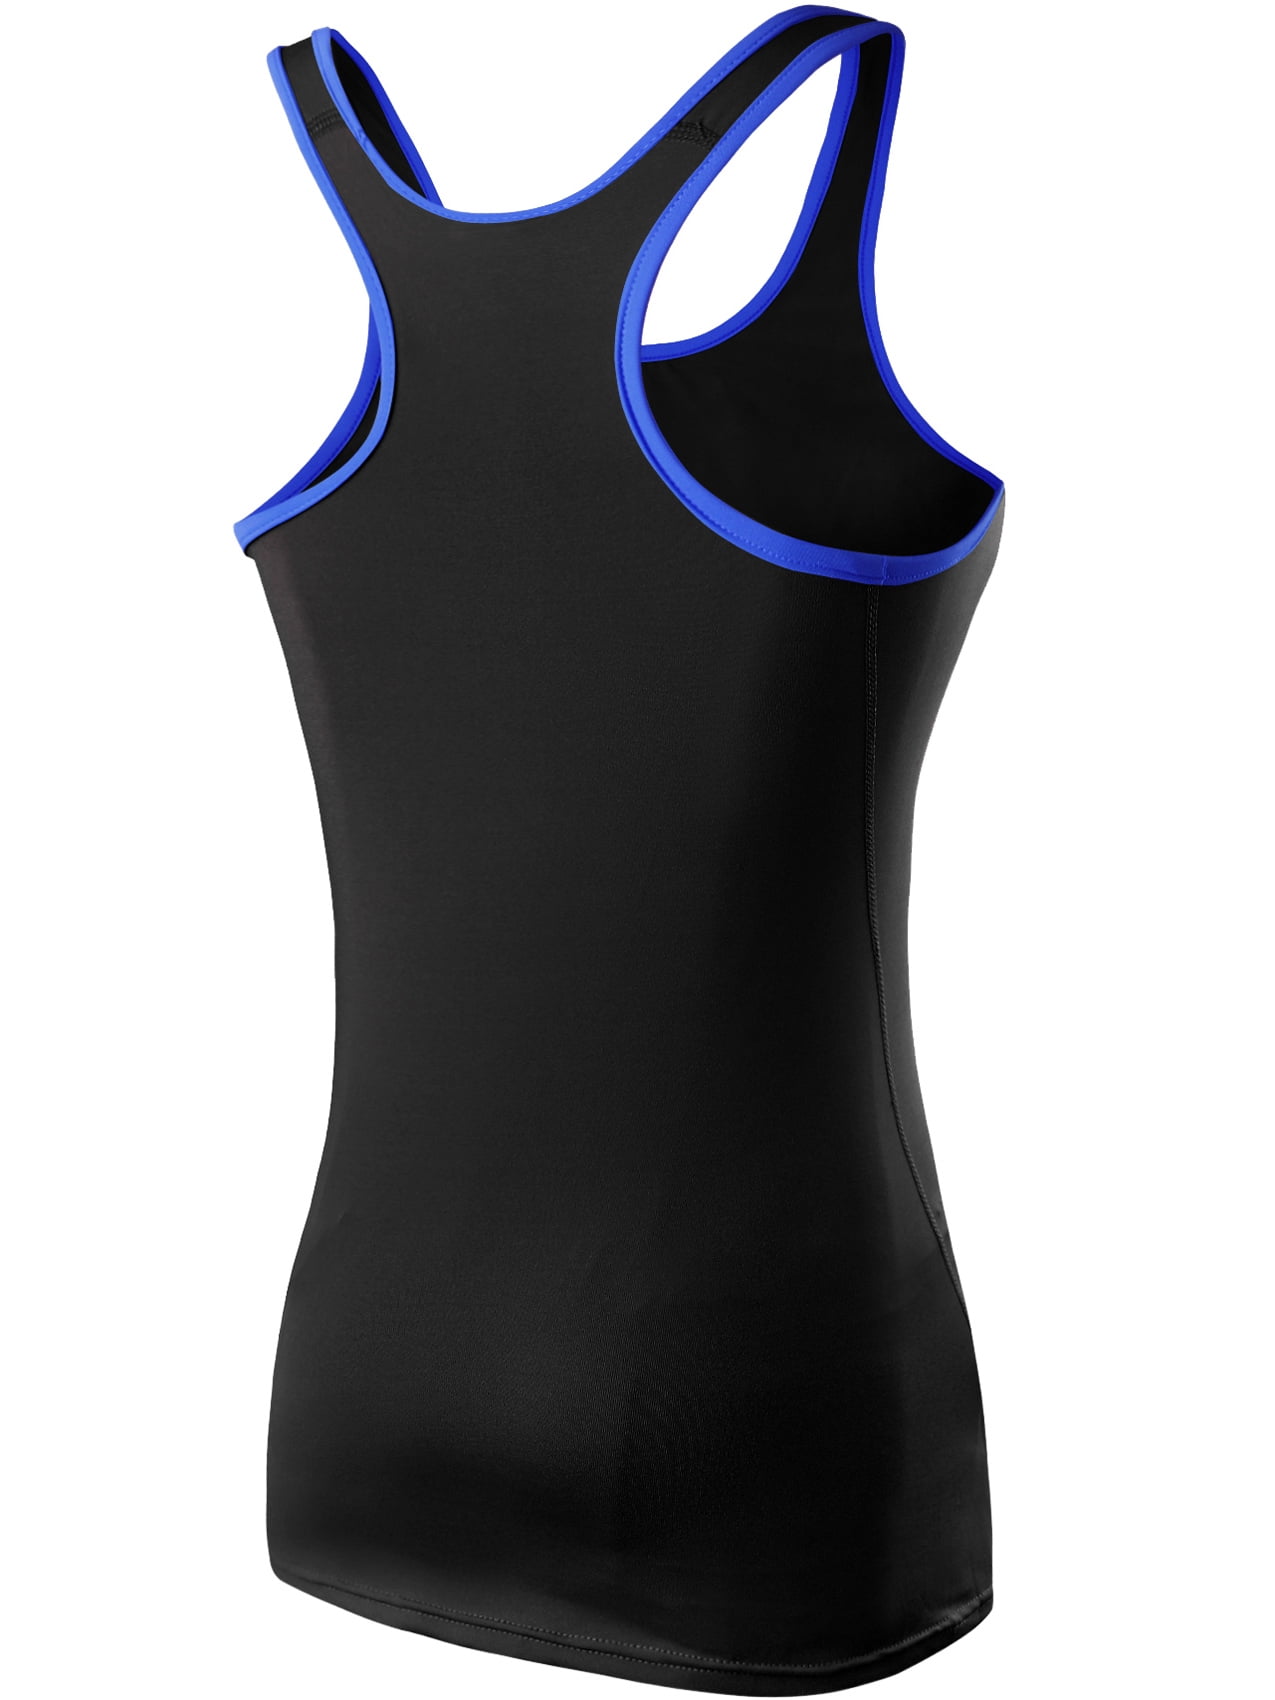 Neleus Women's 3 Pack Dry Fit Compression Athletic Tank Top,3 Pack:Black,White,Blue,Large